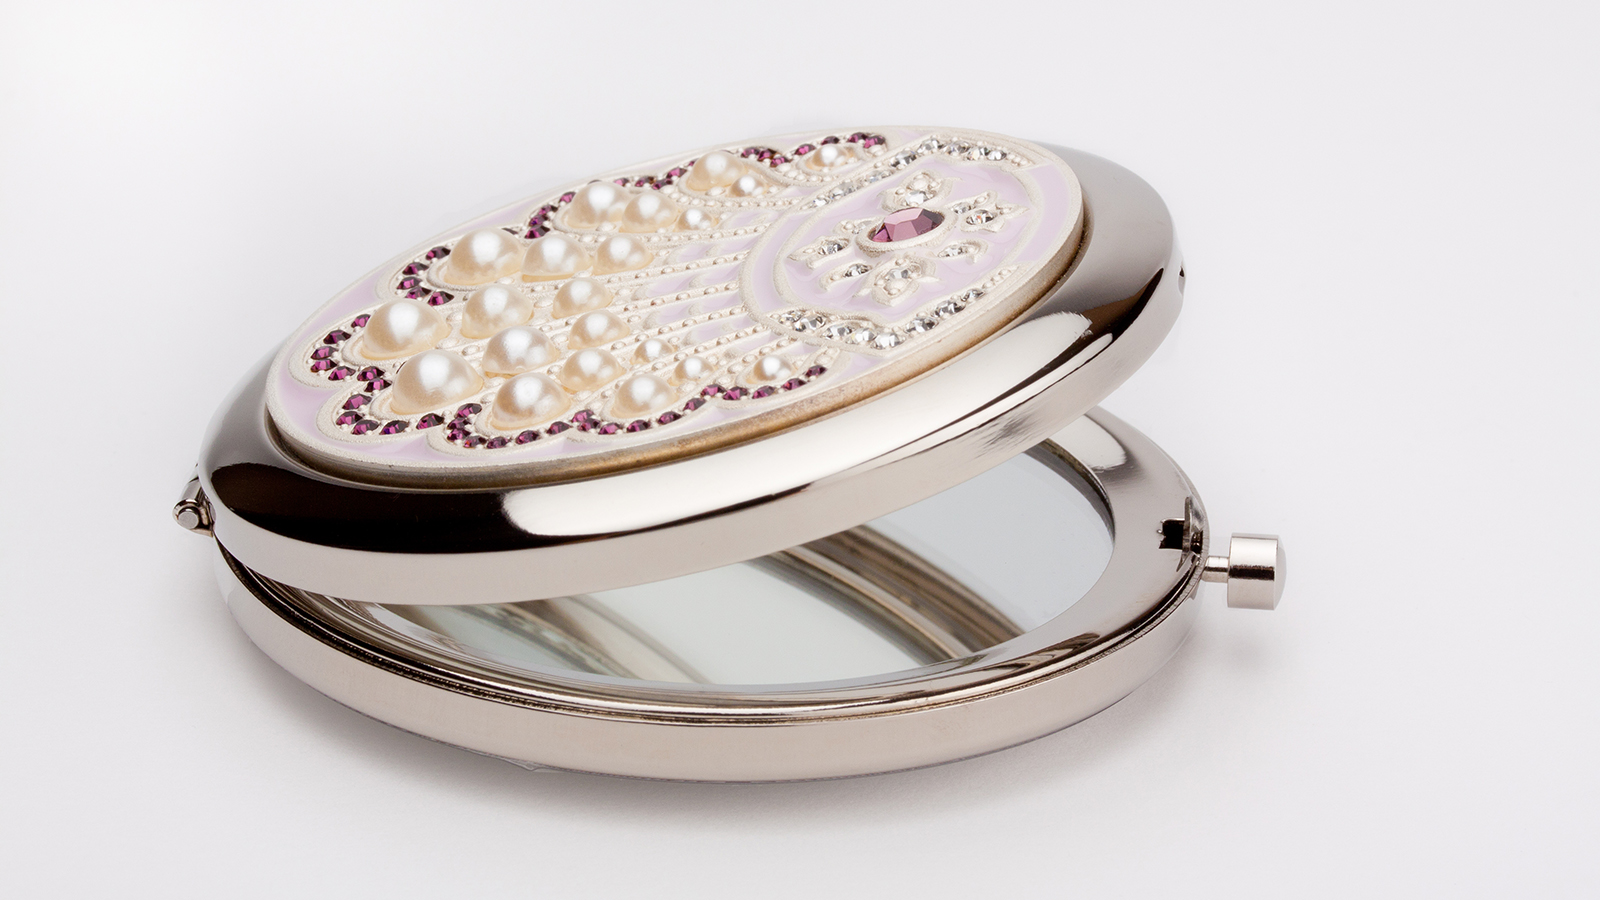 Round pocket makeup mirror with pearls and purple stones on white background